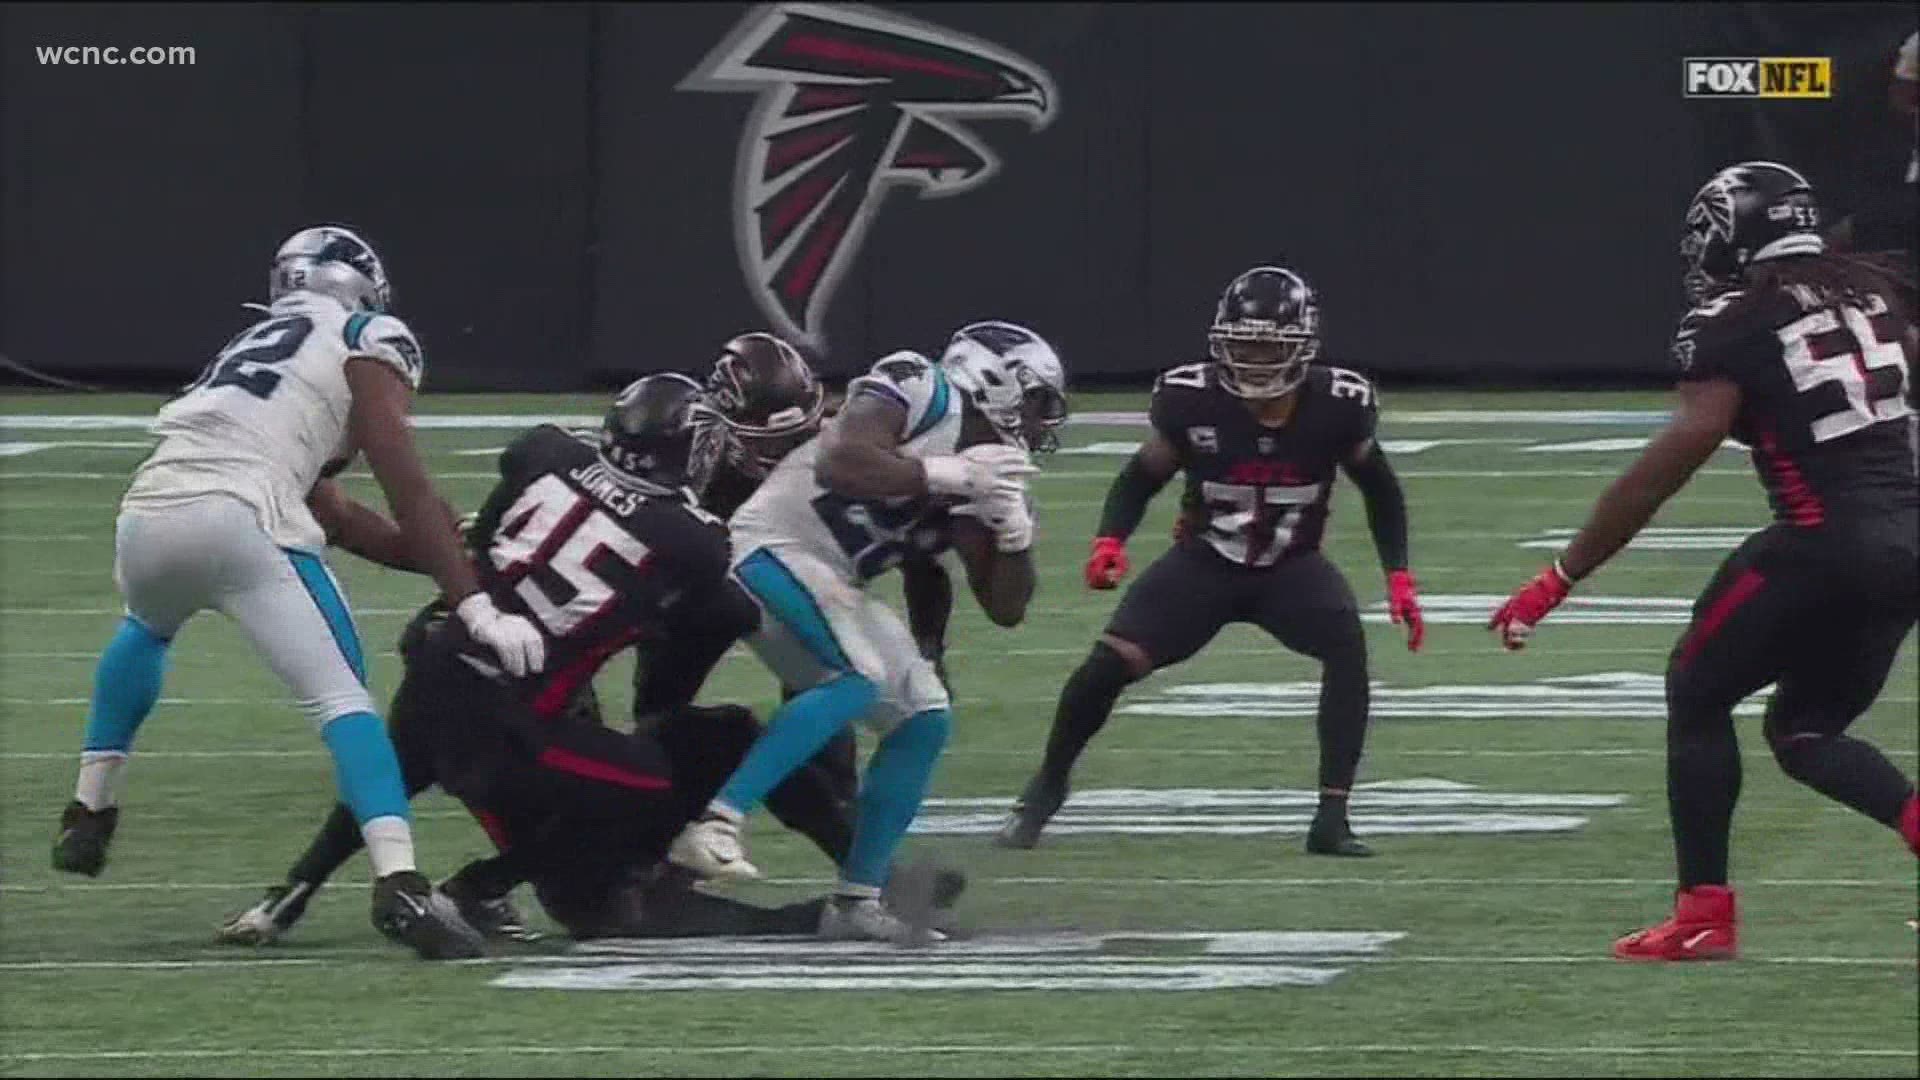 The Carolina Panthers won their 3rd straight game against the Atlanta Falcons.